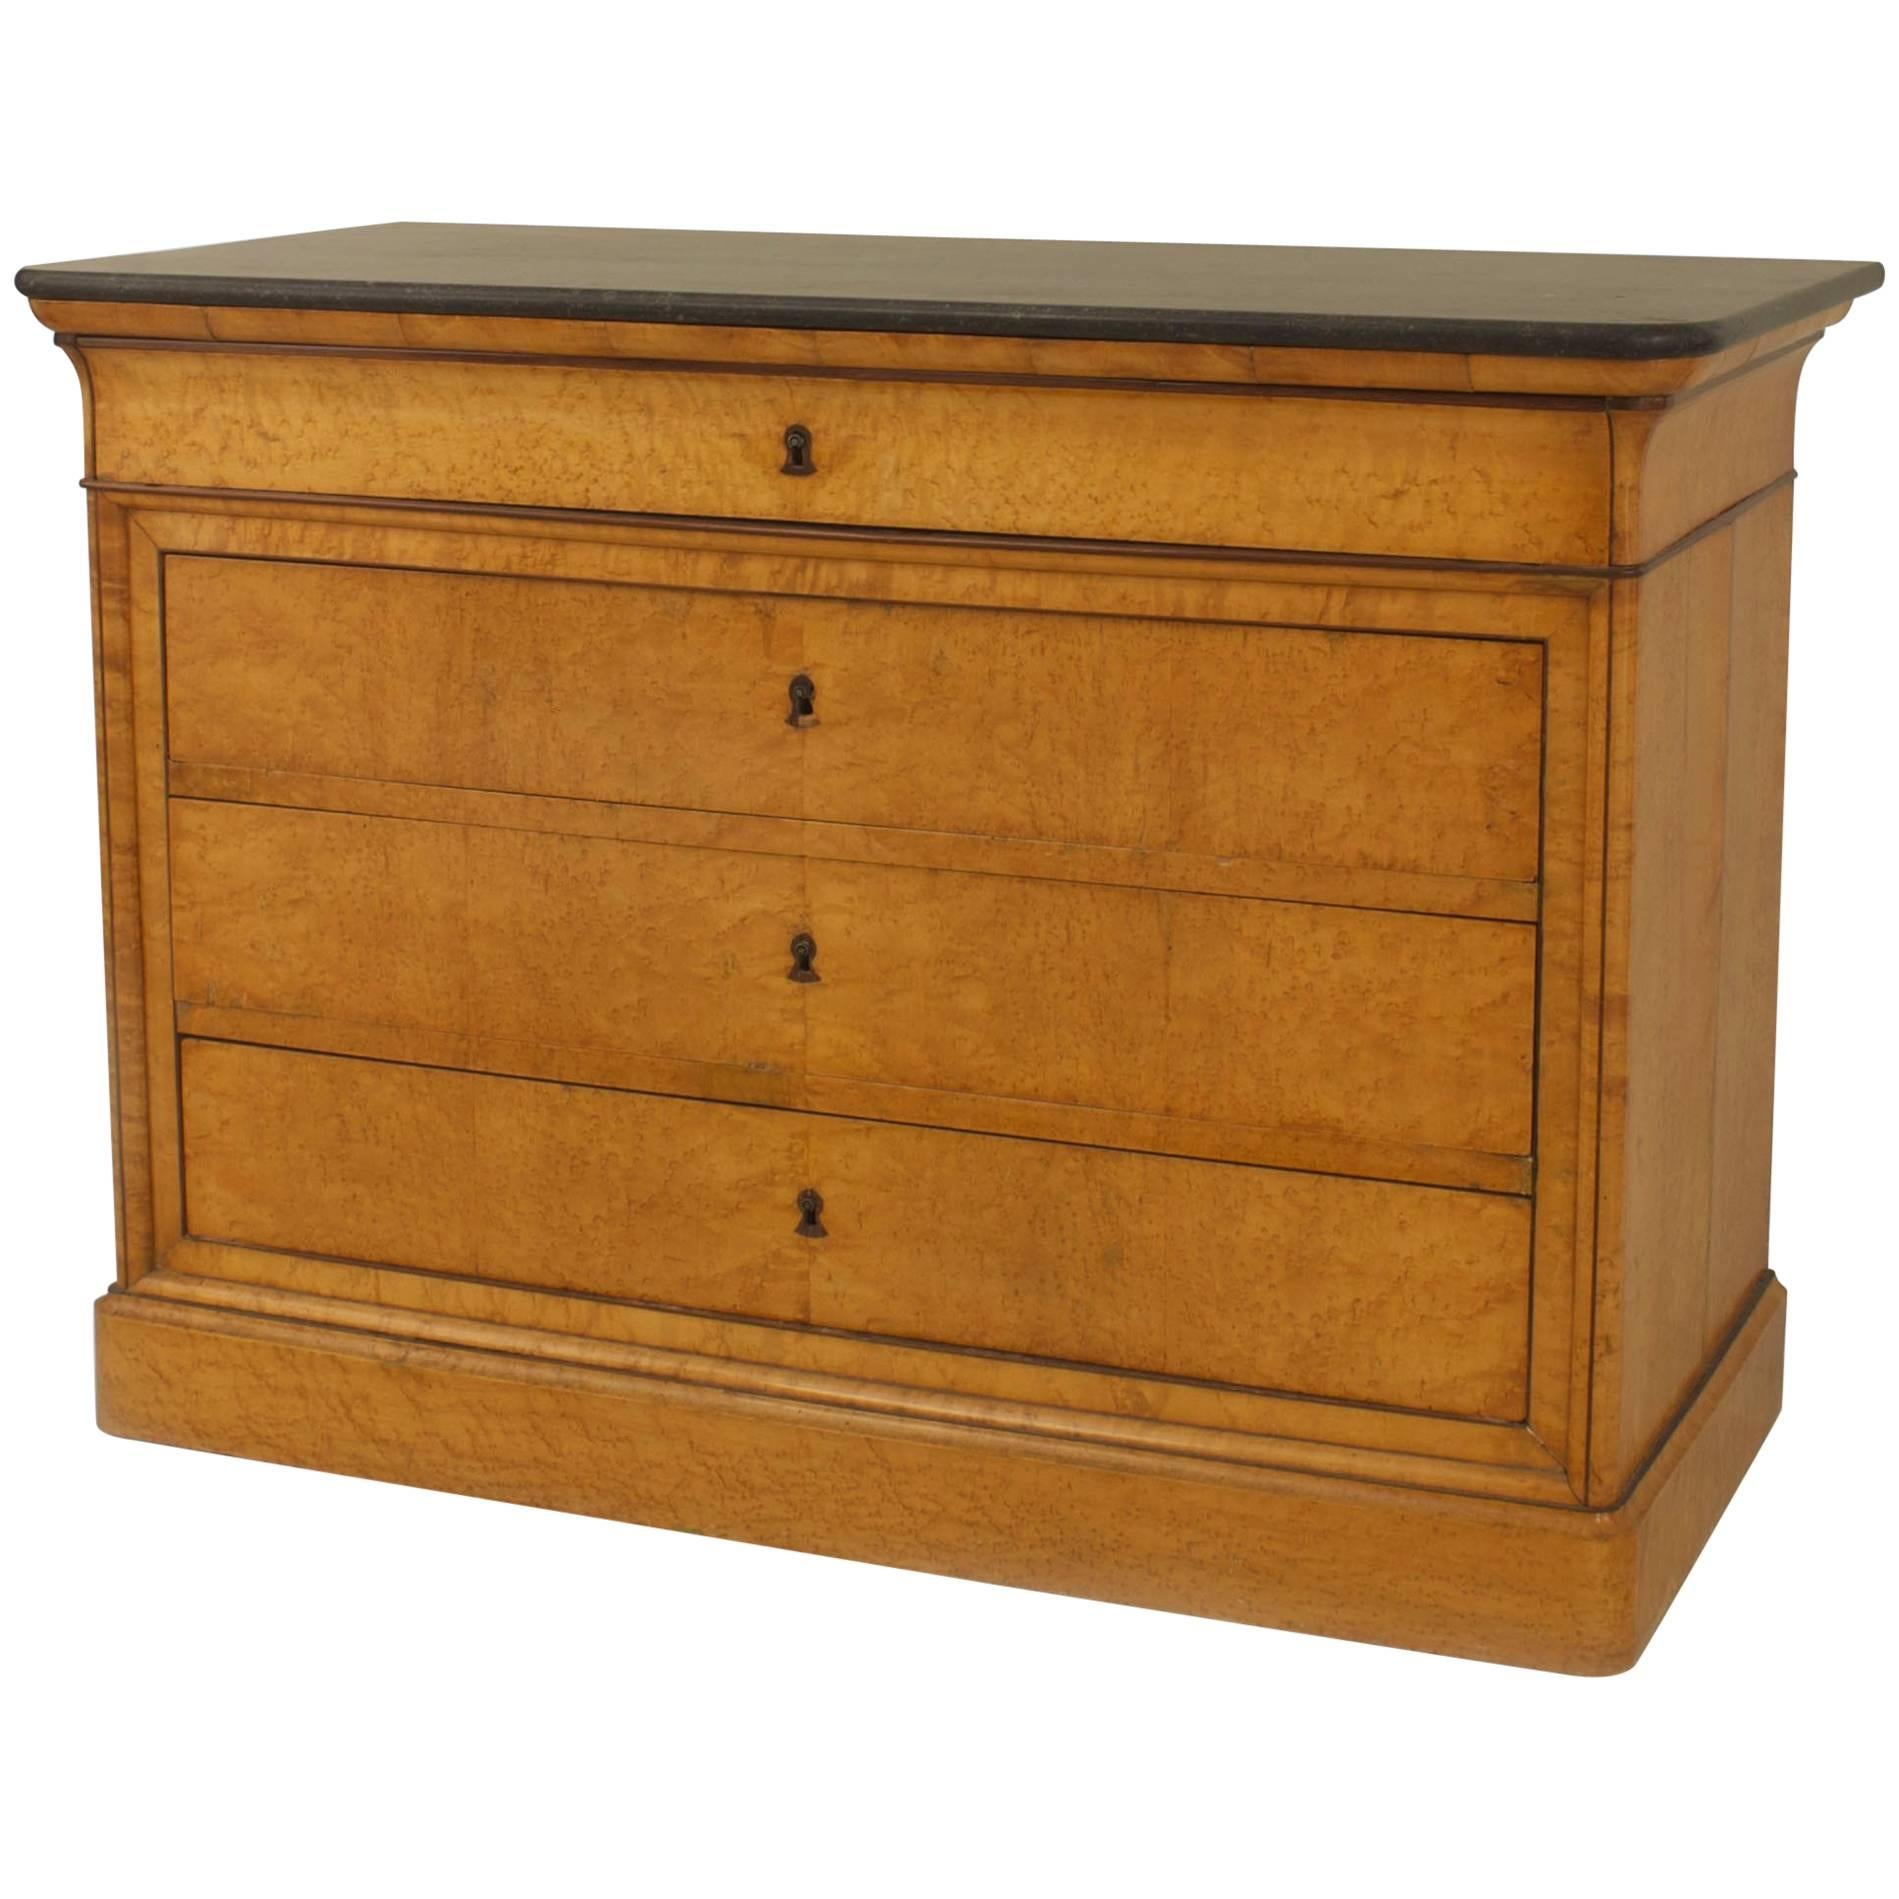 French Charles X Maple Chest